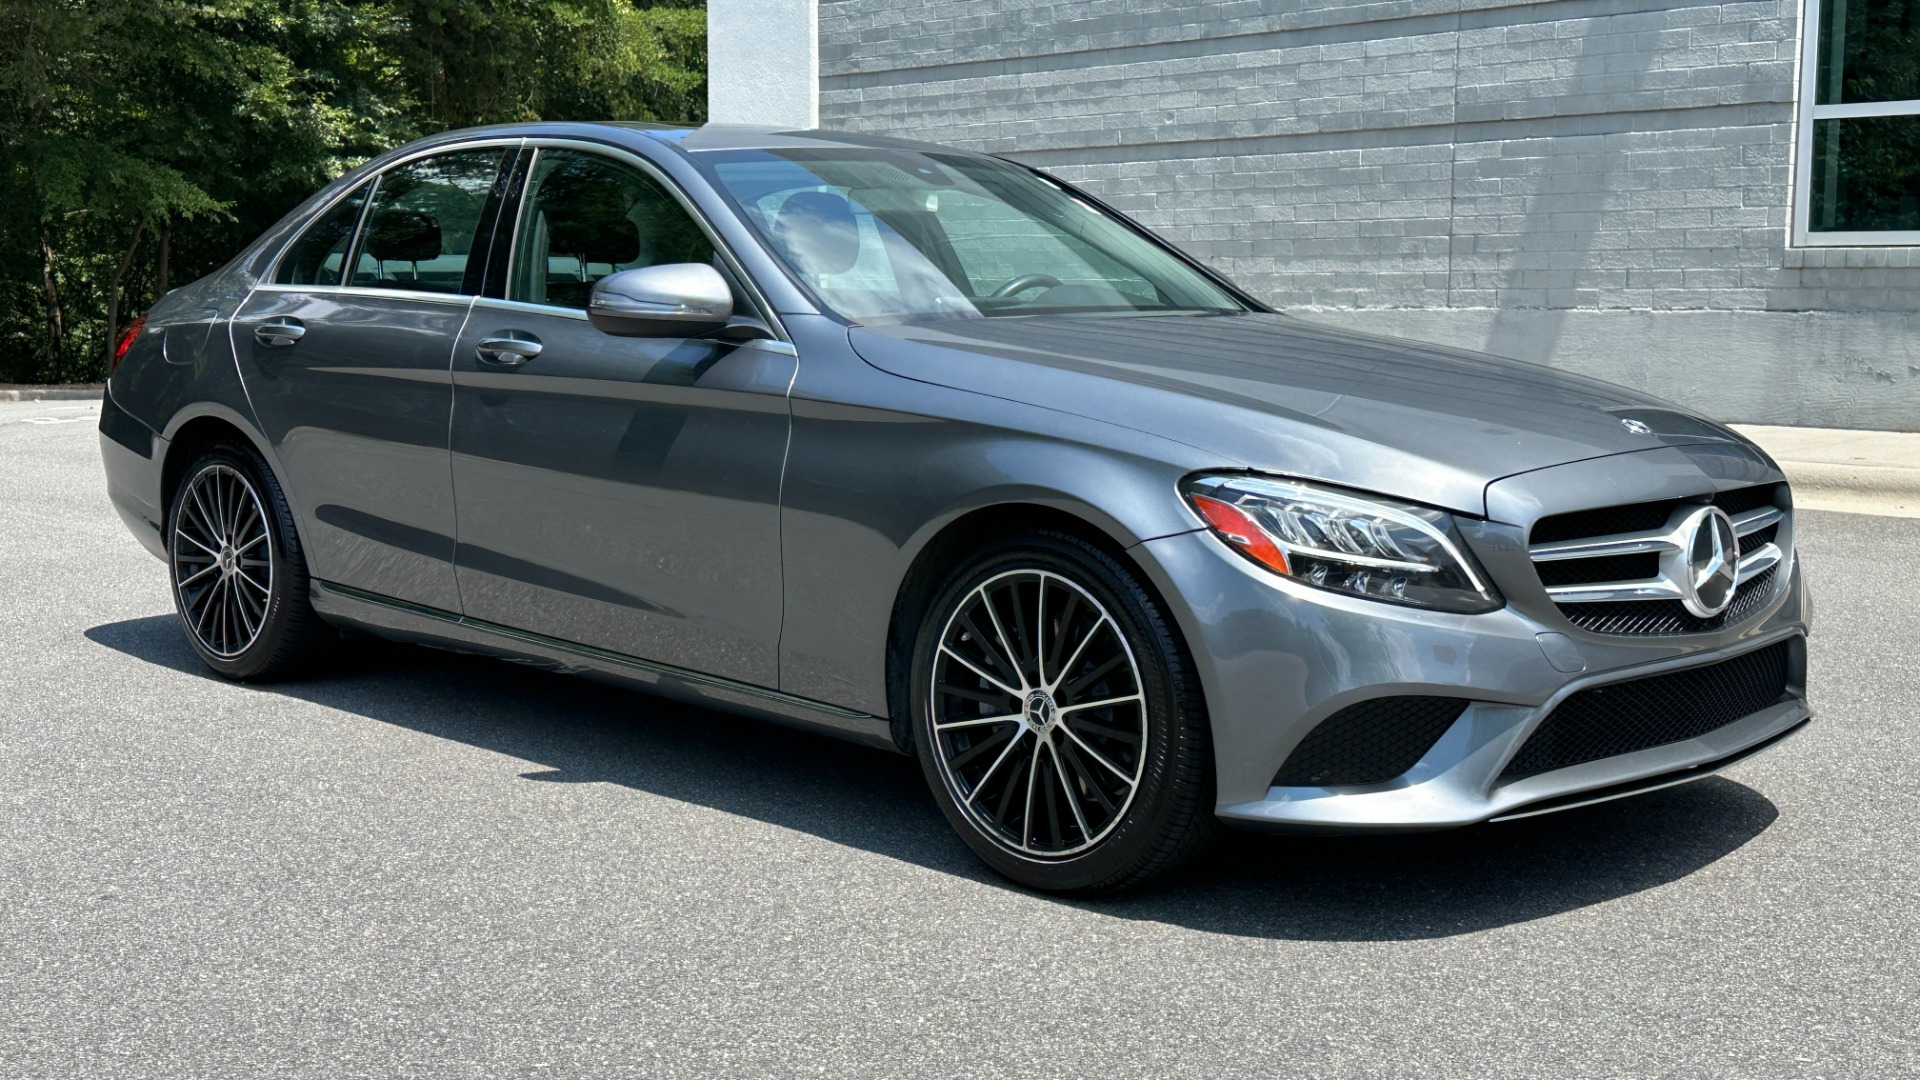 Used 2019 Mercedes-Benz C-Class C300 / PREMIUM / AMBIENT LIGHTS / BLIND SPOT / 10.25IN DISPLAY for sale $27,595 at Formula Imports in Charlotte NC 28227 5